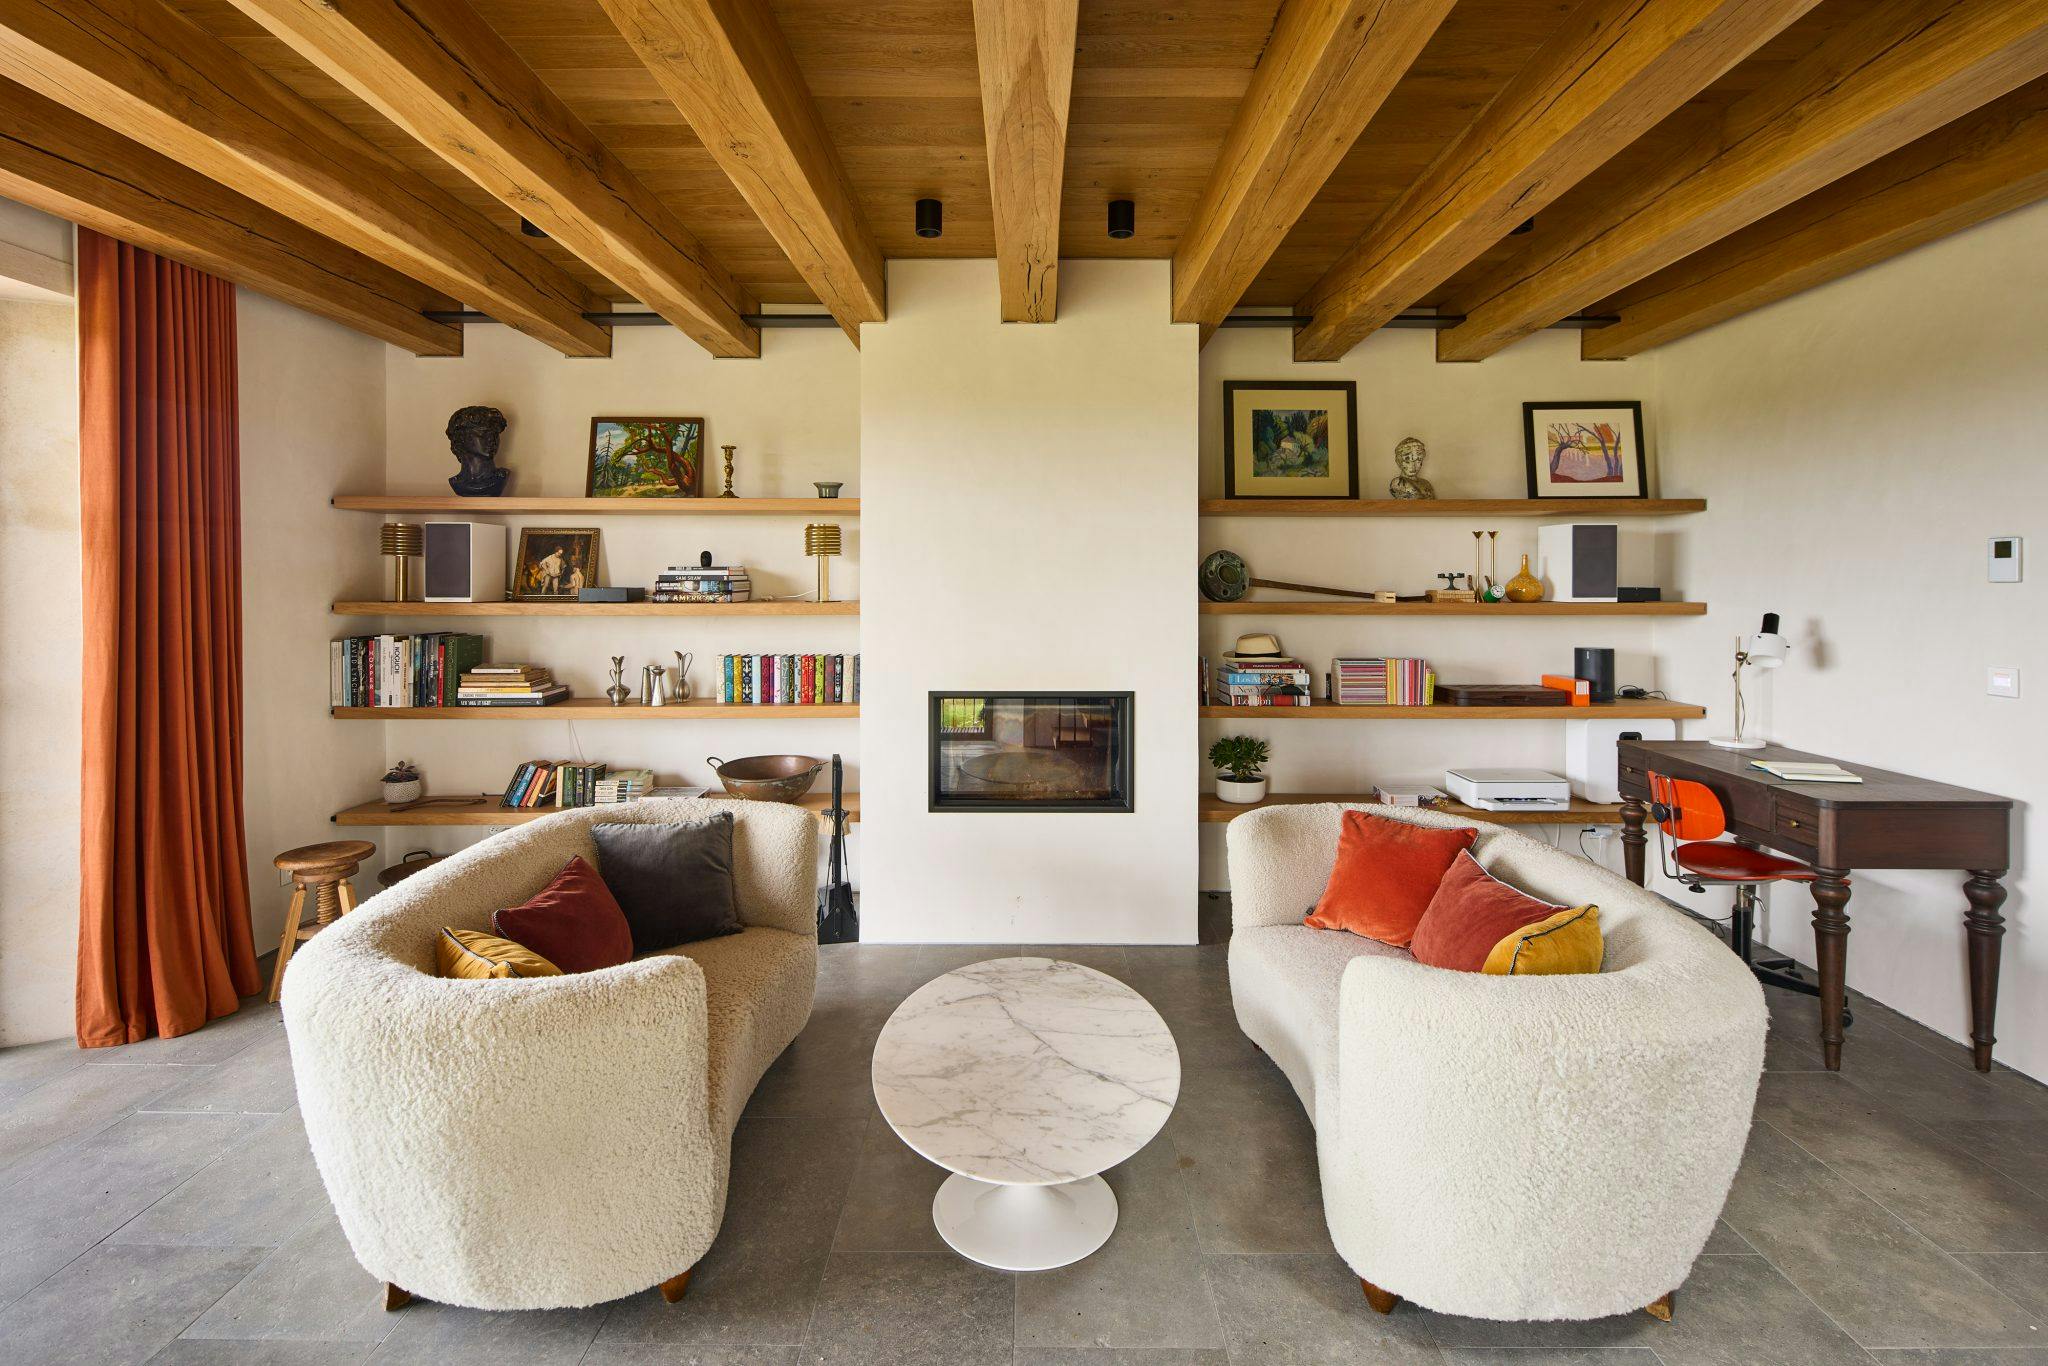 Fireplace-living room, bookcase and two sheep's wool sofas facing each other